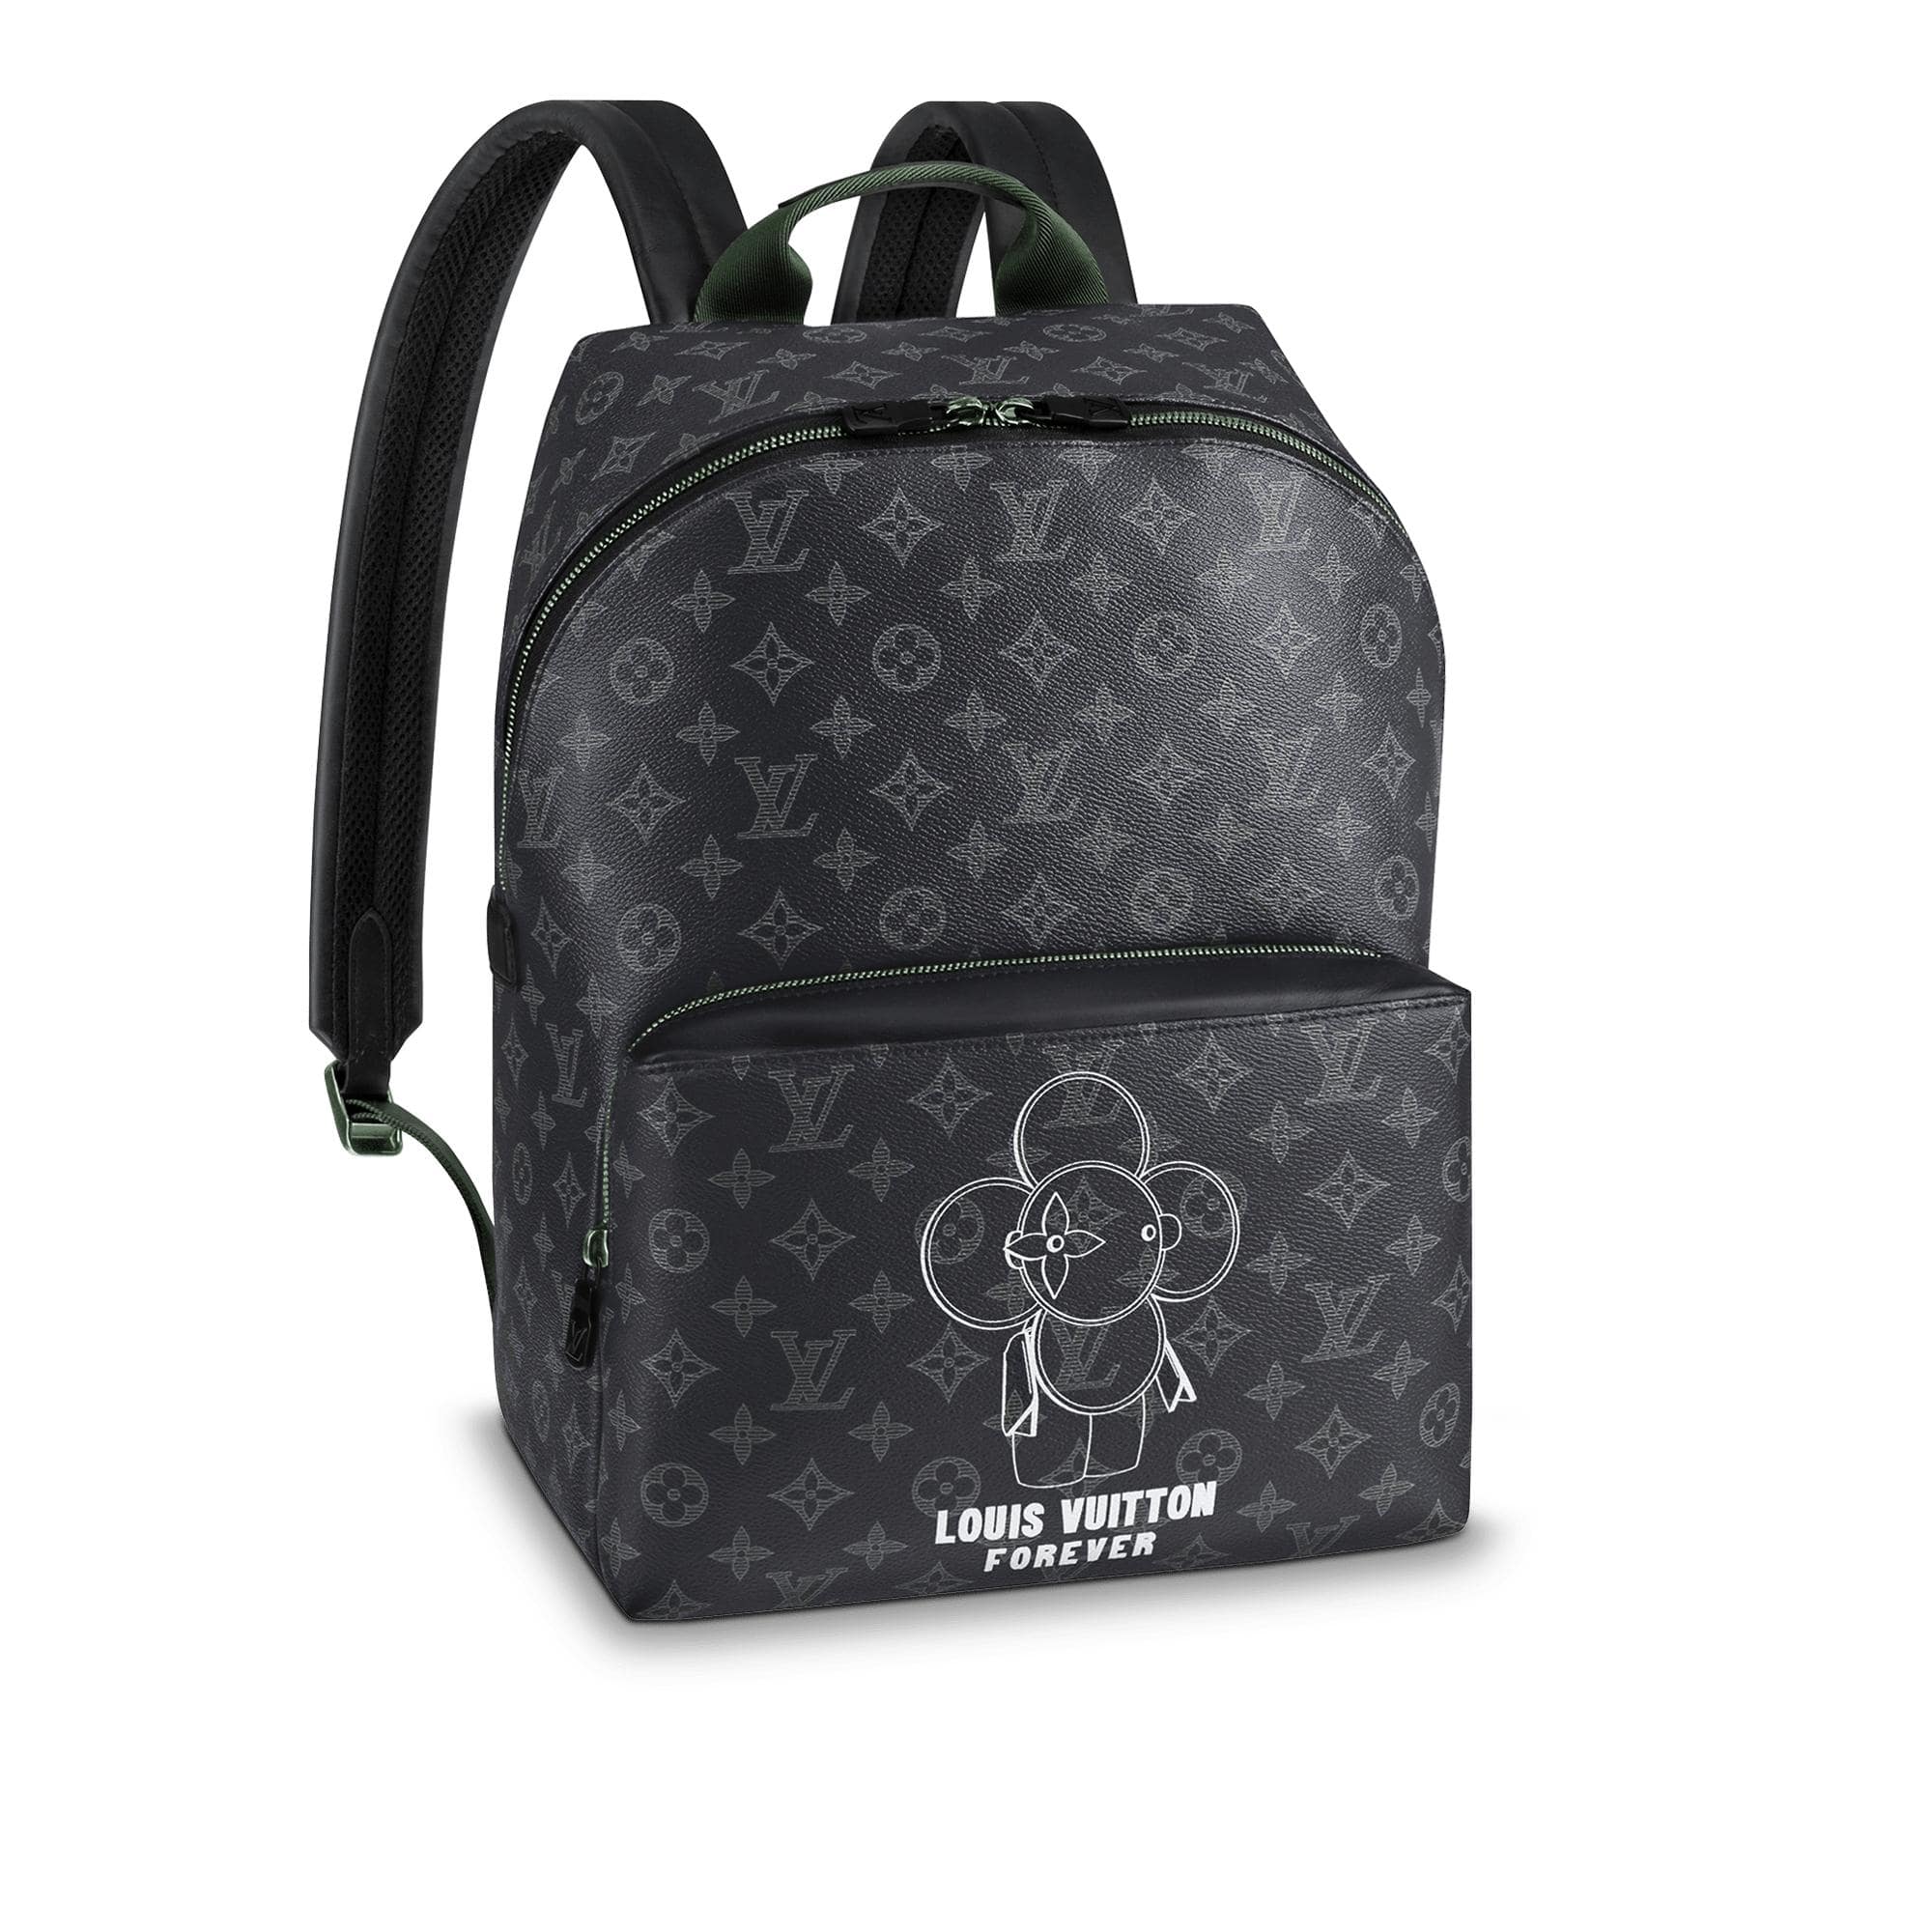 LOUIS VUITTON Apollo backpack rucksack M43186Product  Code2107600786681BRAND OFF Online Store